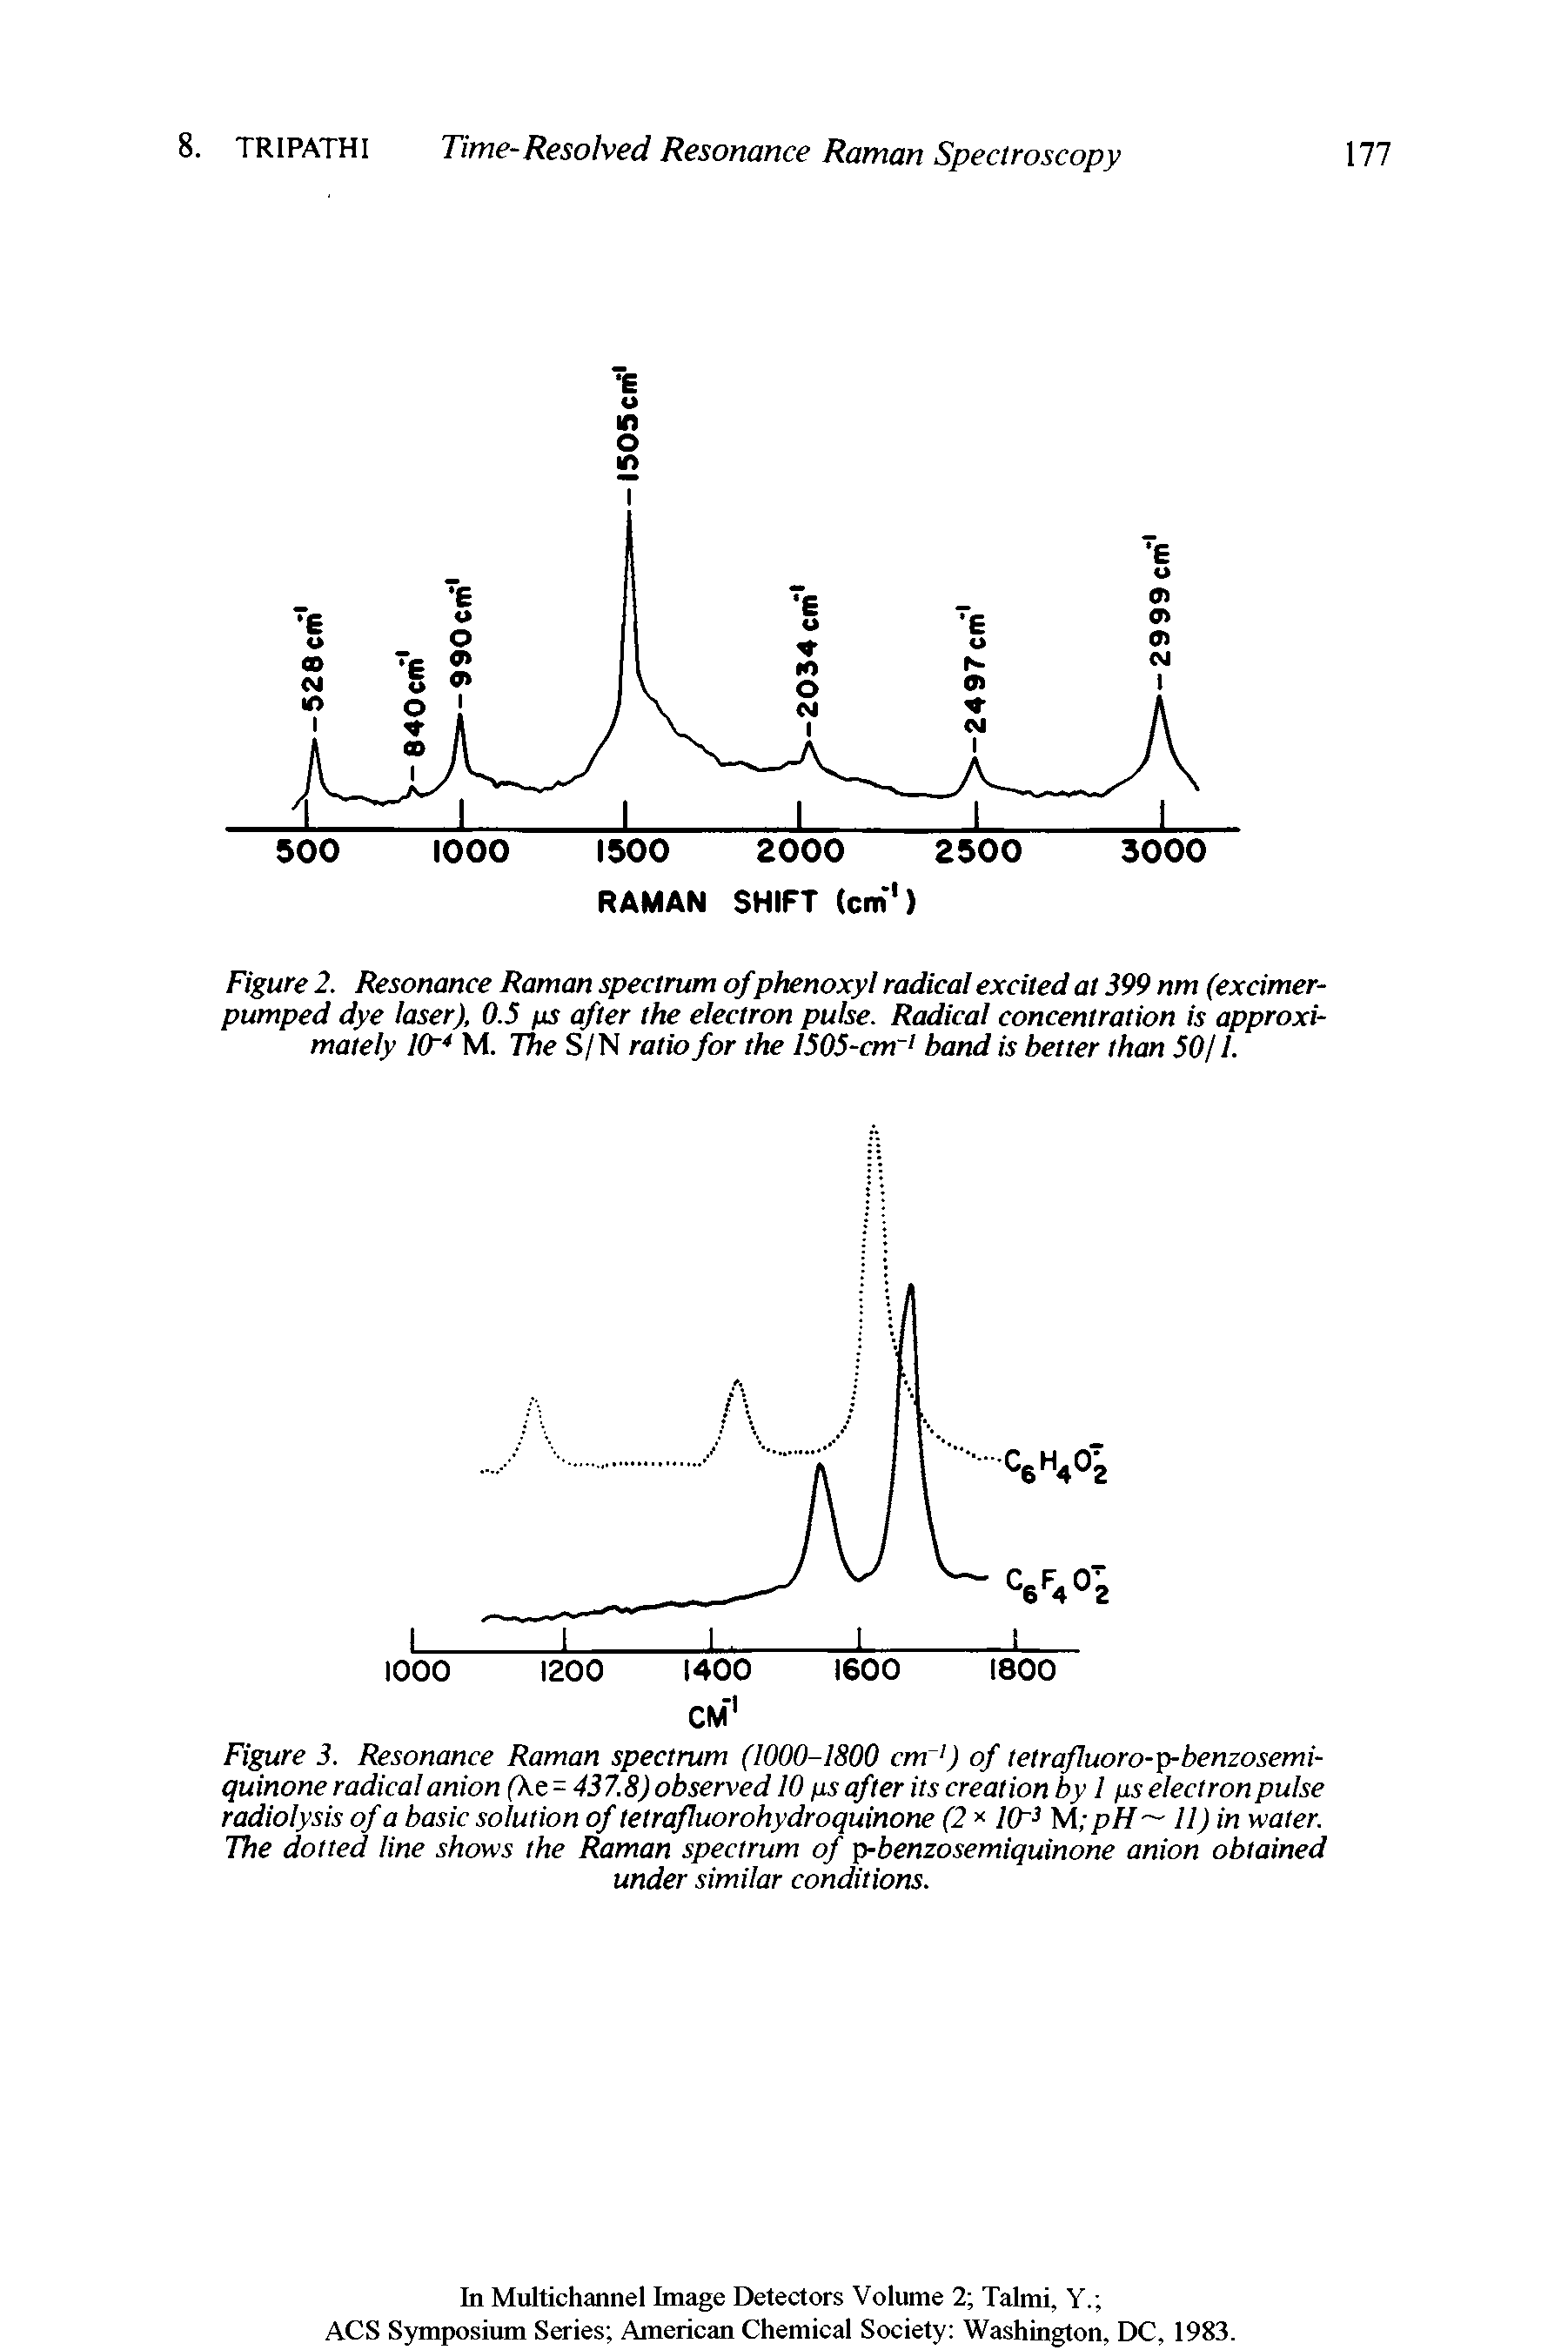 Figure 3. Resonance Raman spectrum (1000-1800 cm1) of tetrafluoro-p-benzosemi-quinone radical anion (kt = 437.8) observed 10 ps after its creation by 1 ps electron pulse radiolysis of a basic solution of tetrafluorohydroquinone (2 10 3 M pH II) in water. The dotted line shows the Raman spectrum of p-benzosemiquinone anion obtained under similar conditions.